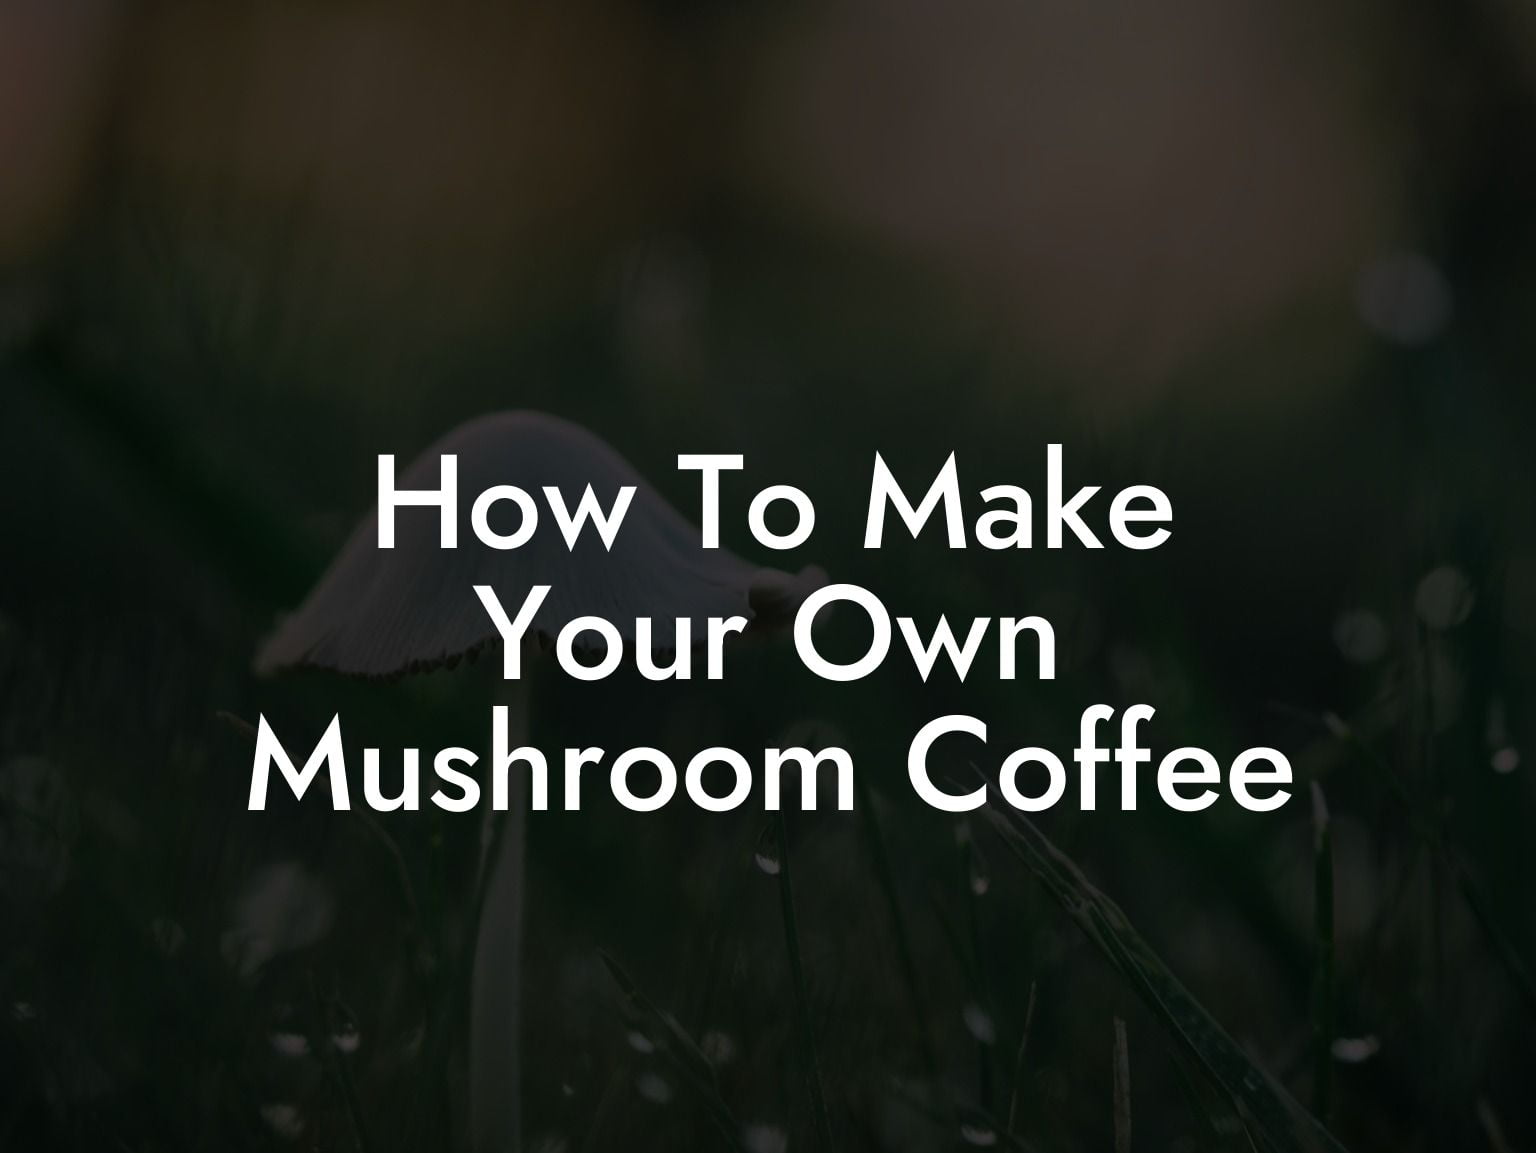 How To Make Your Own Mushroom Coffee